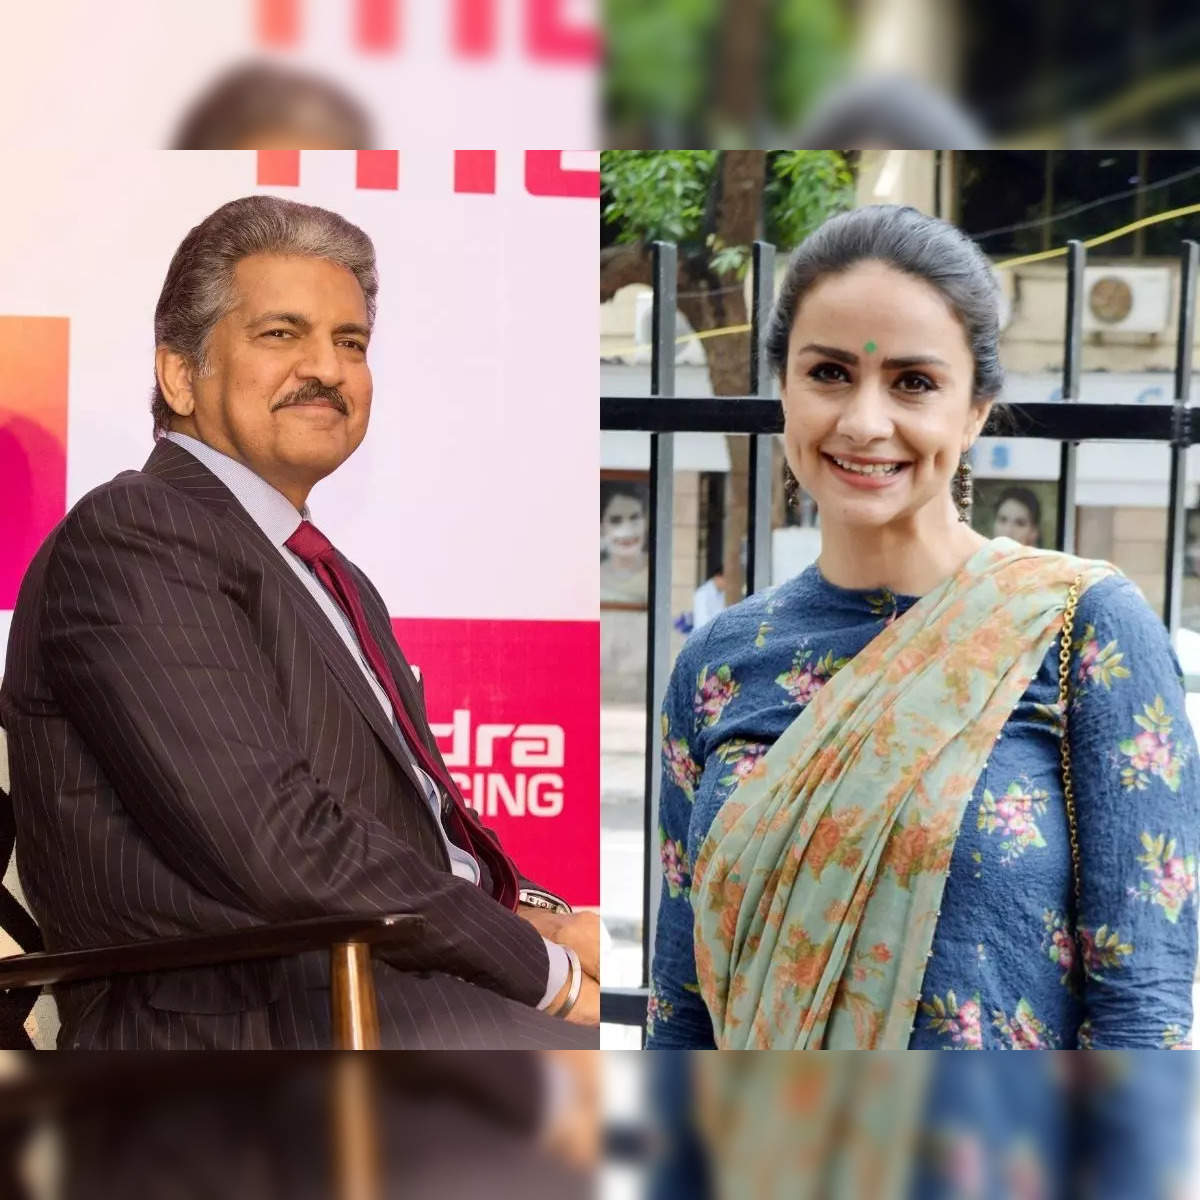 Gul Panag Xxx - Anand Mahindra's most-used Tamil phrase is 'Poda Dei', Gul Panag says it's  the first Tamil expression most people learn - The Economic Times